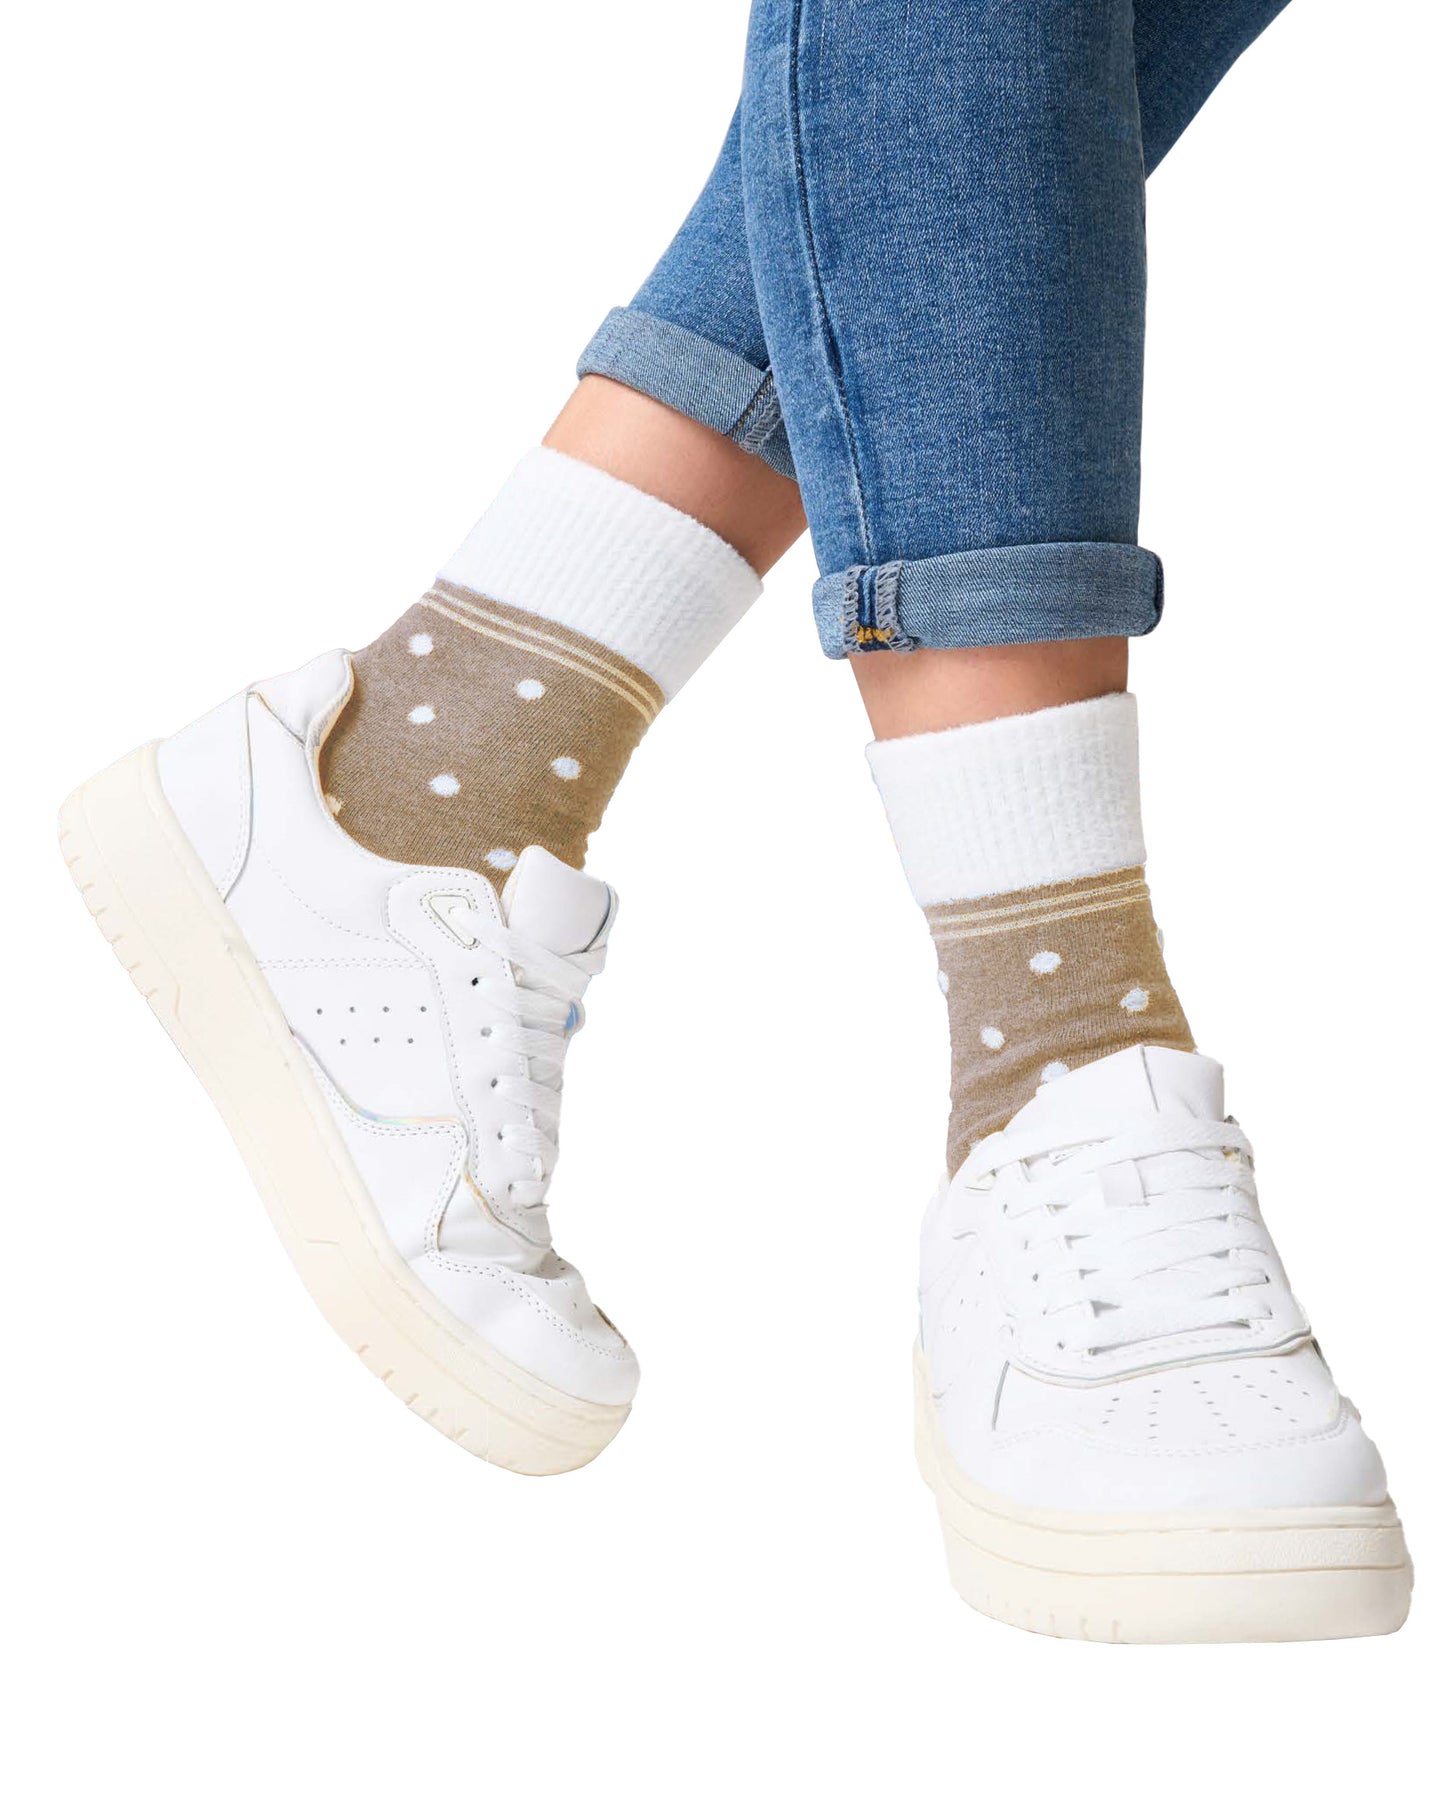 SiSi Puff Calzino - Beige / oat cotton mix ankle socks with a contrasting cream fluffy faux fur polka dot pattern, double faux fur cuff with gold lamé stripe.